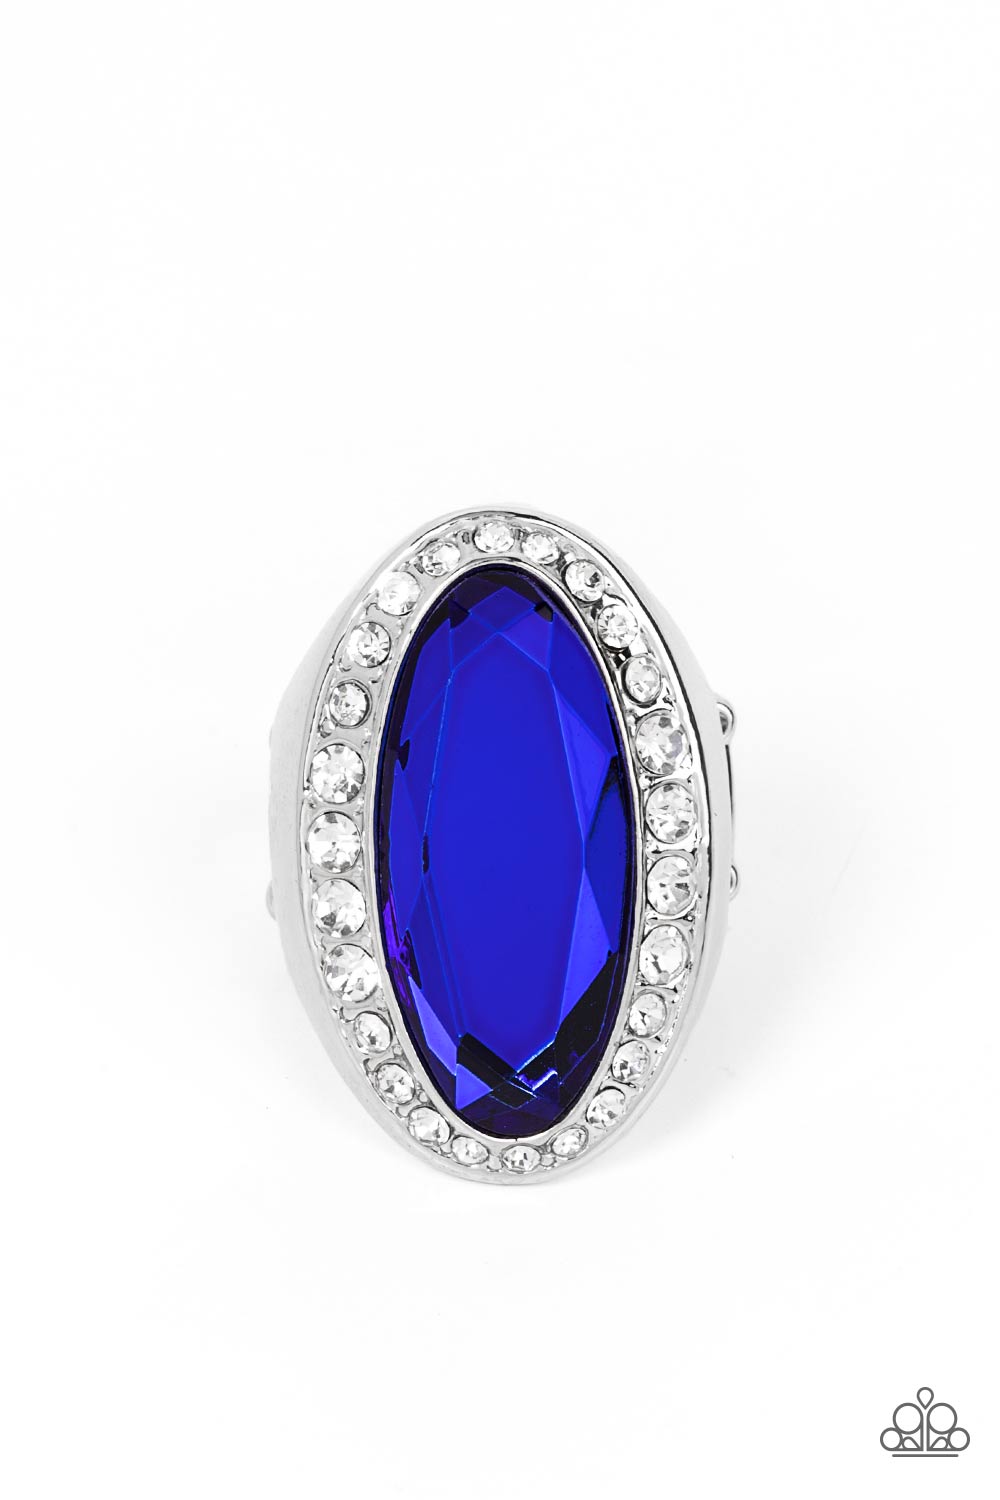 Paparazzi Accessories Believe in Bling - Blue